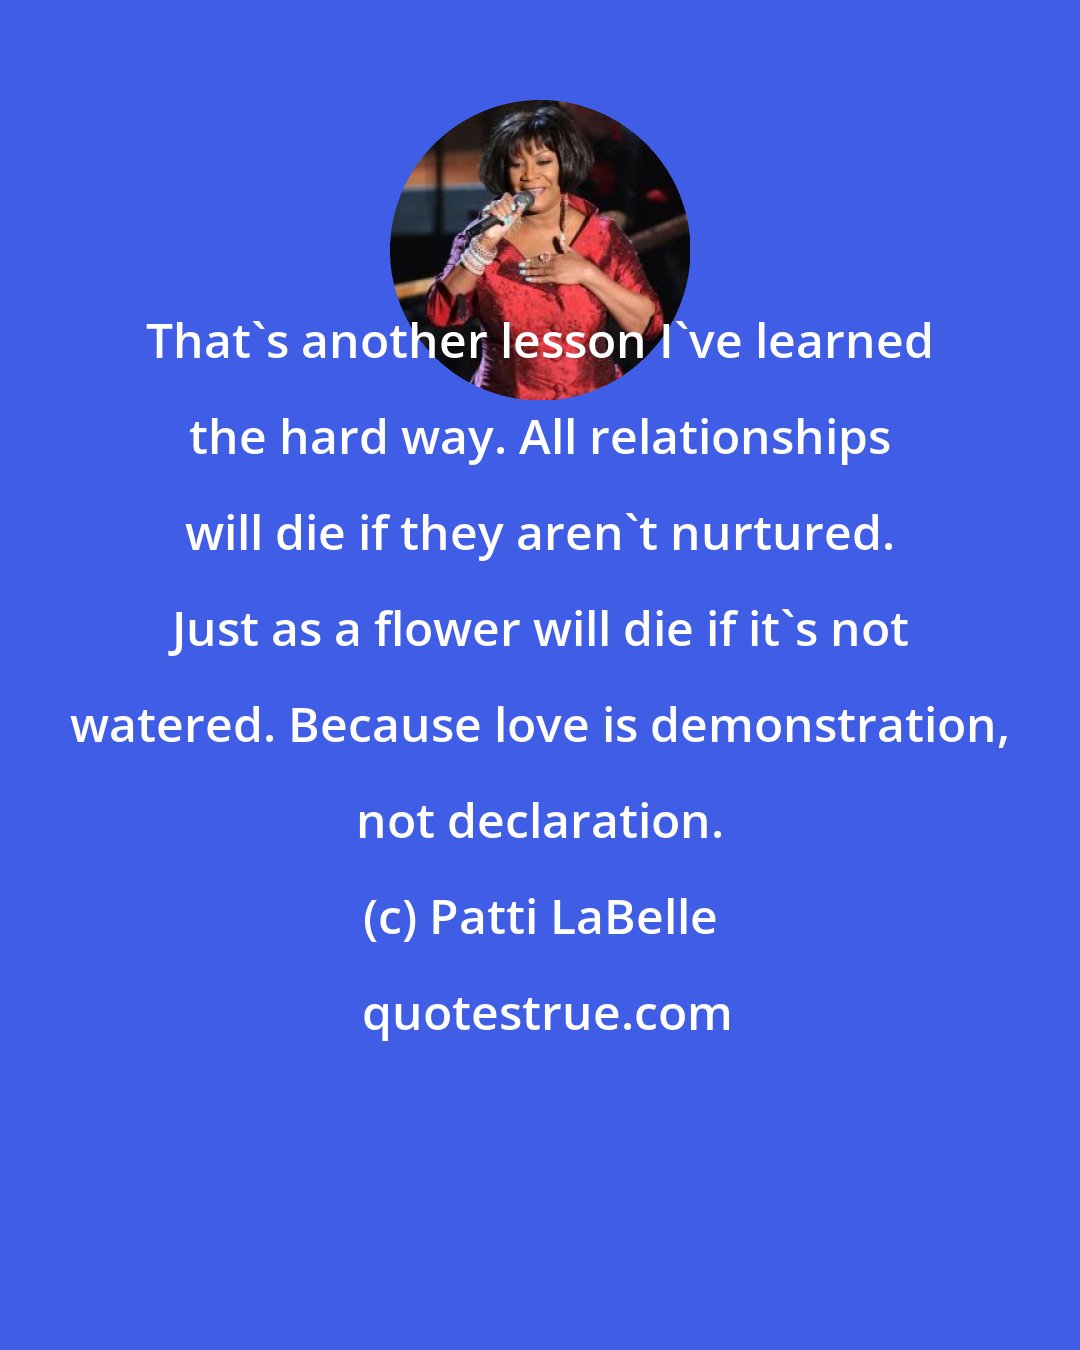 Patti LaBelle: That's another lesson I've learned the hard way. All relationships will die if they aren't nurtured. Just as a flower will die if it's not watered. Because love is demonstration, not declaration.